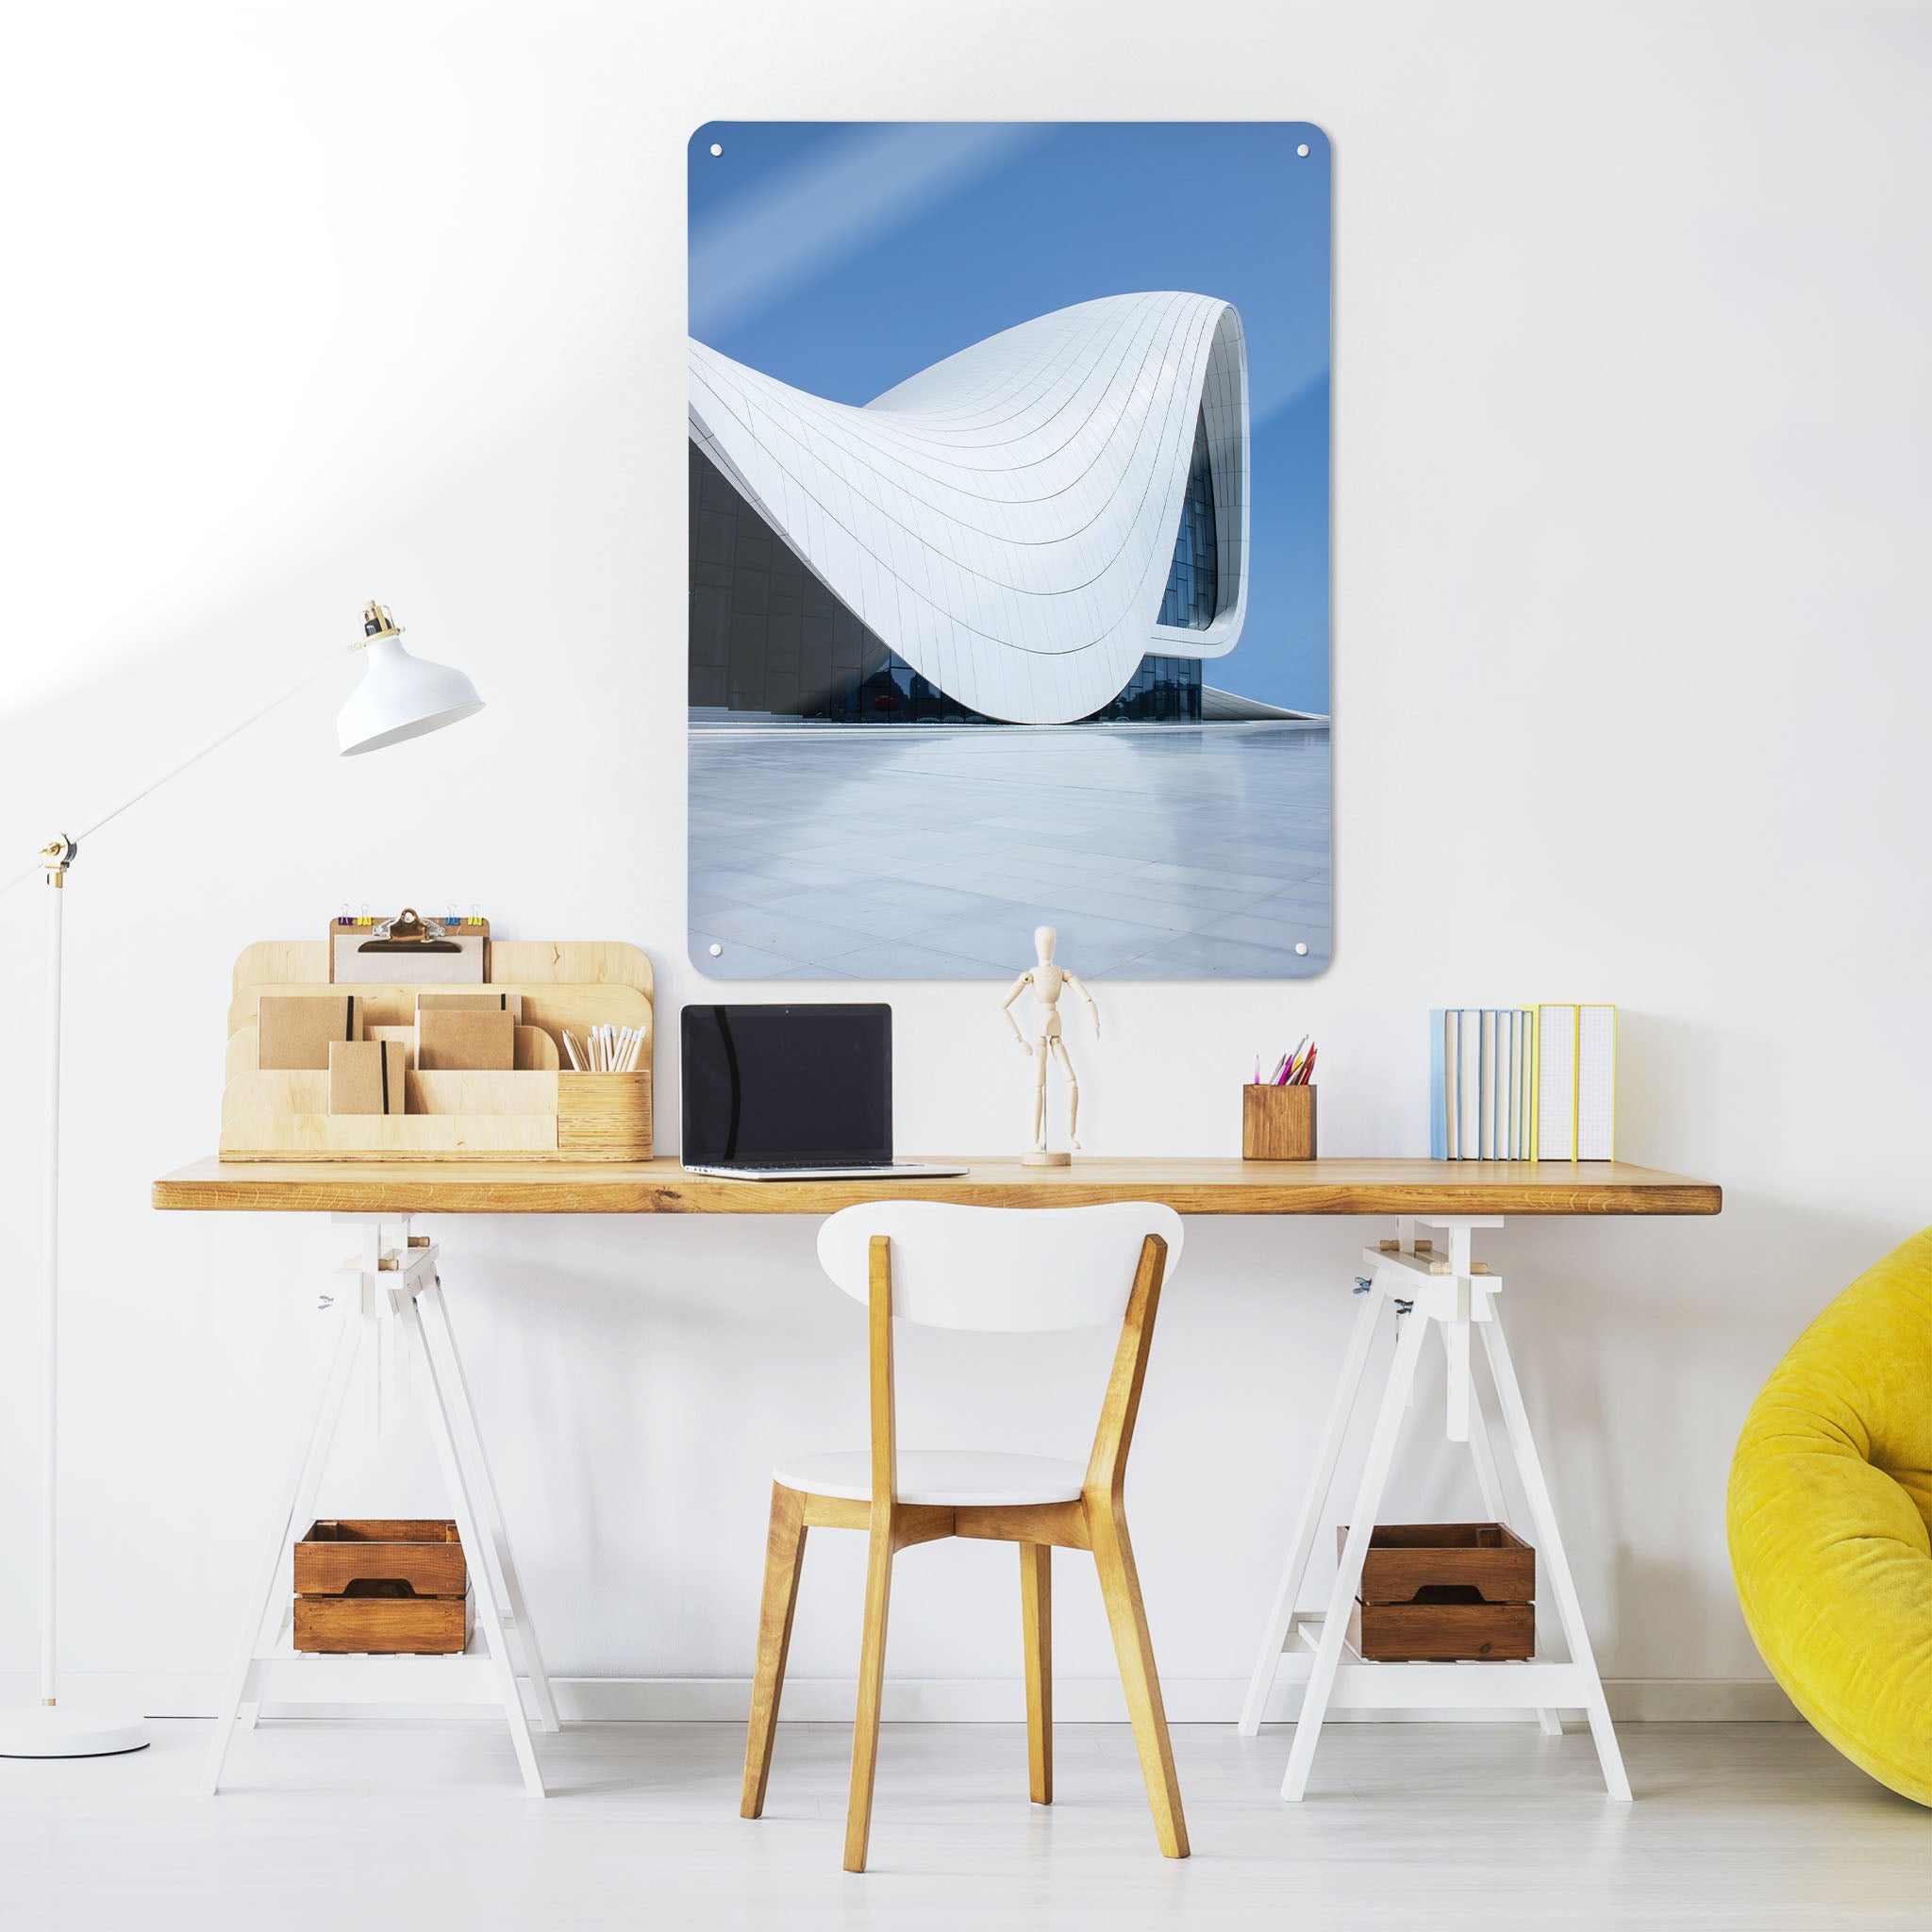 A desk in a workspace setting in a white interior with a magnetic metal wall art panel showing the Heydar Aliyev Centre